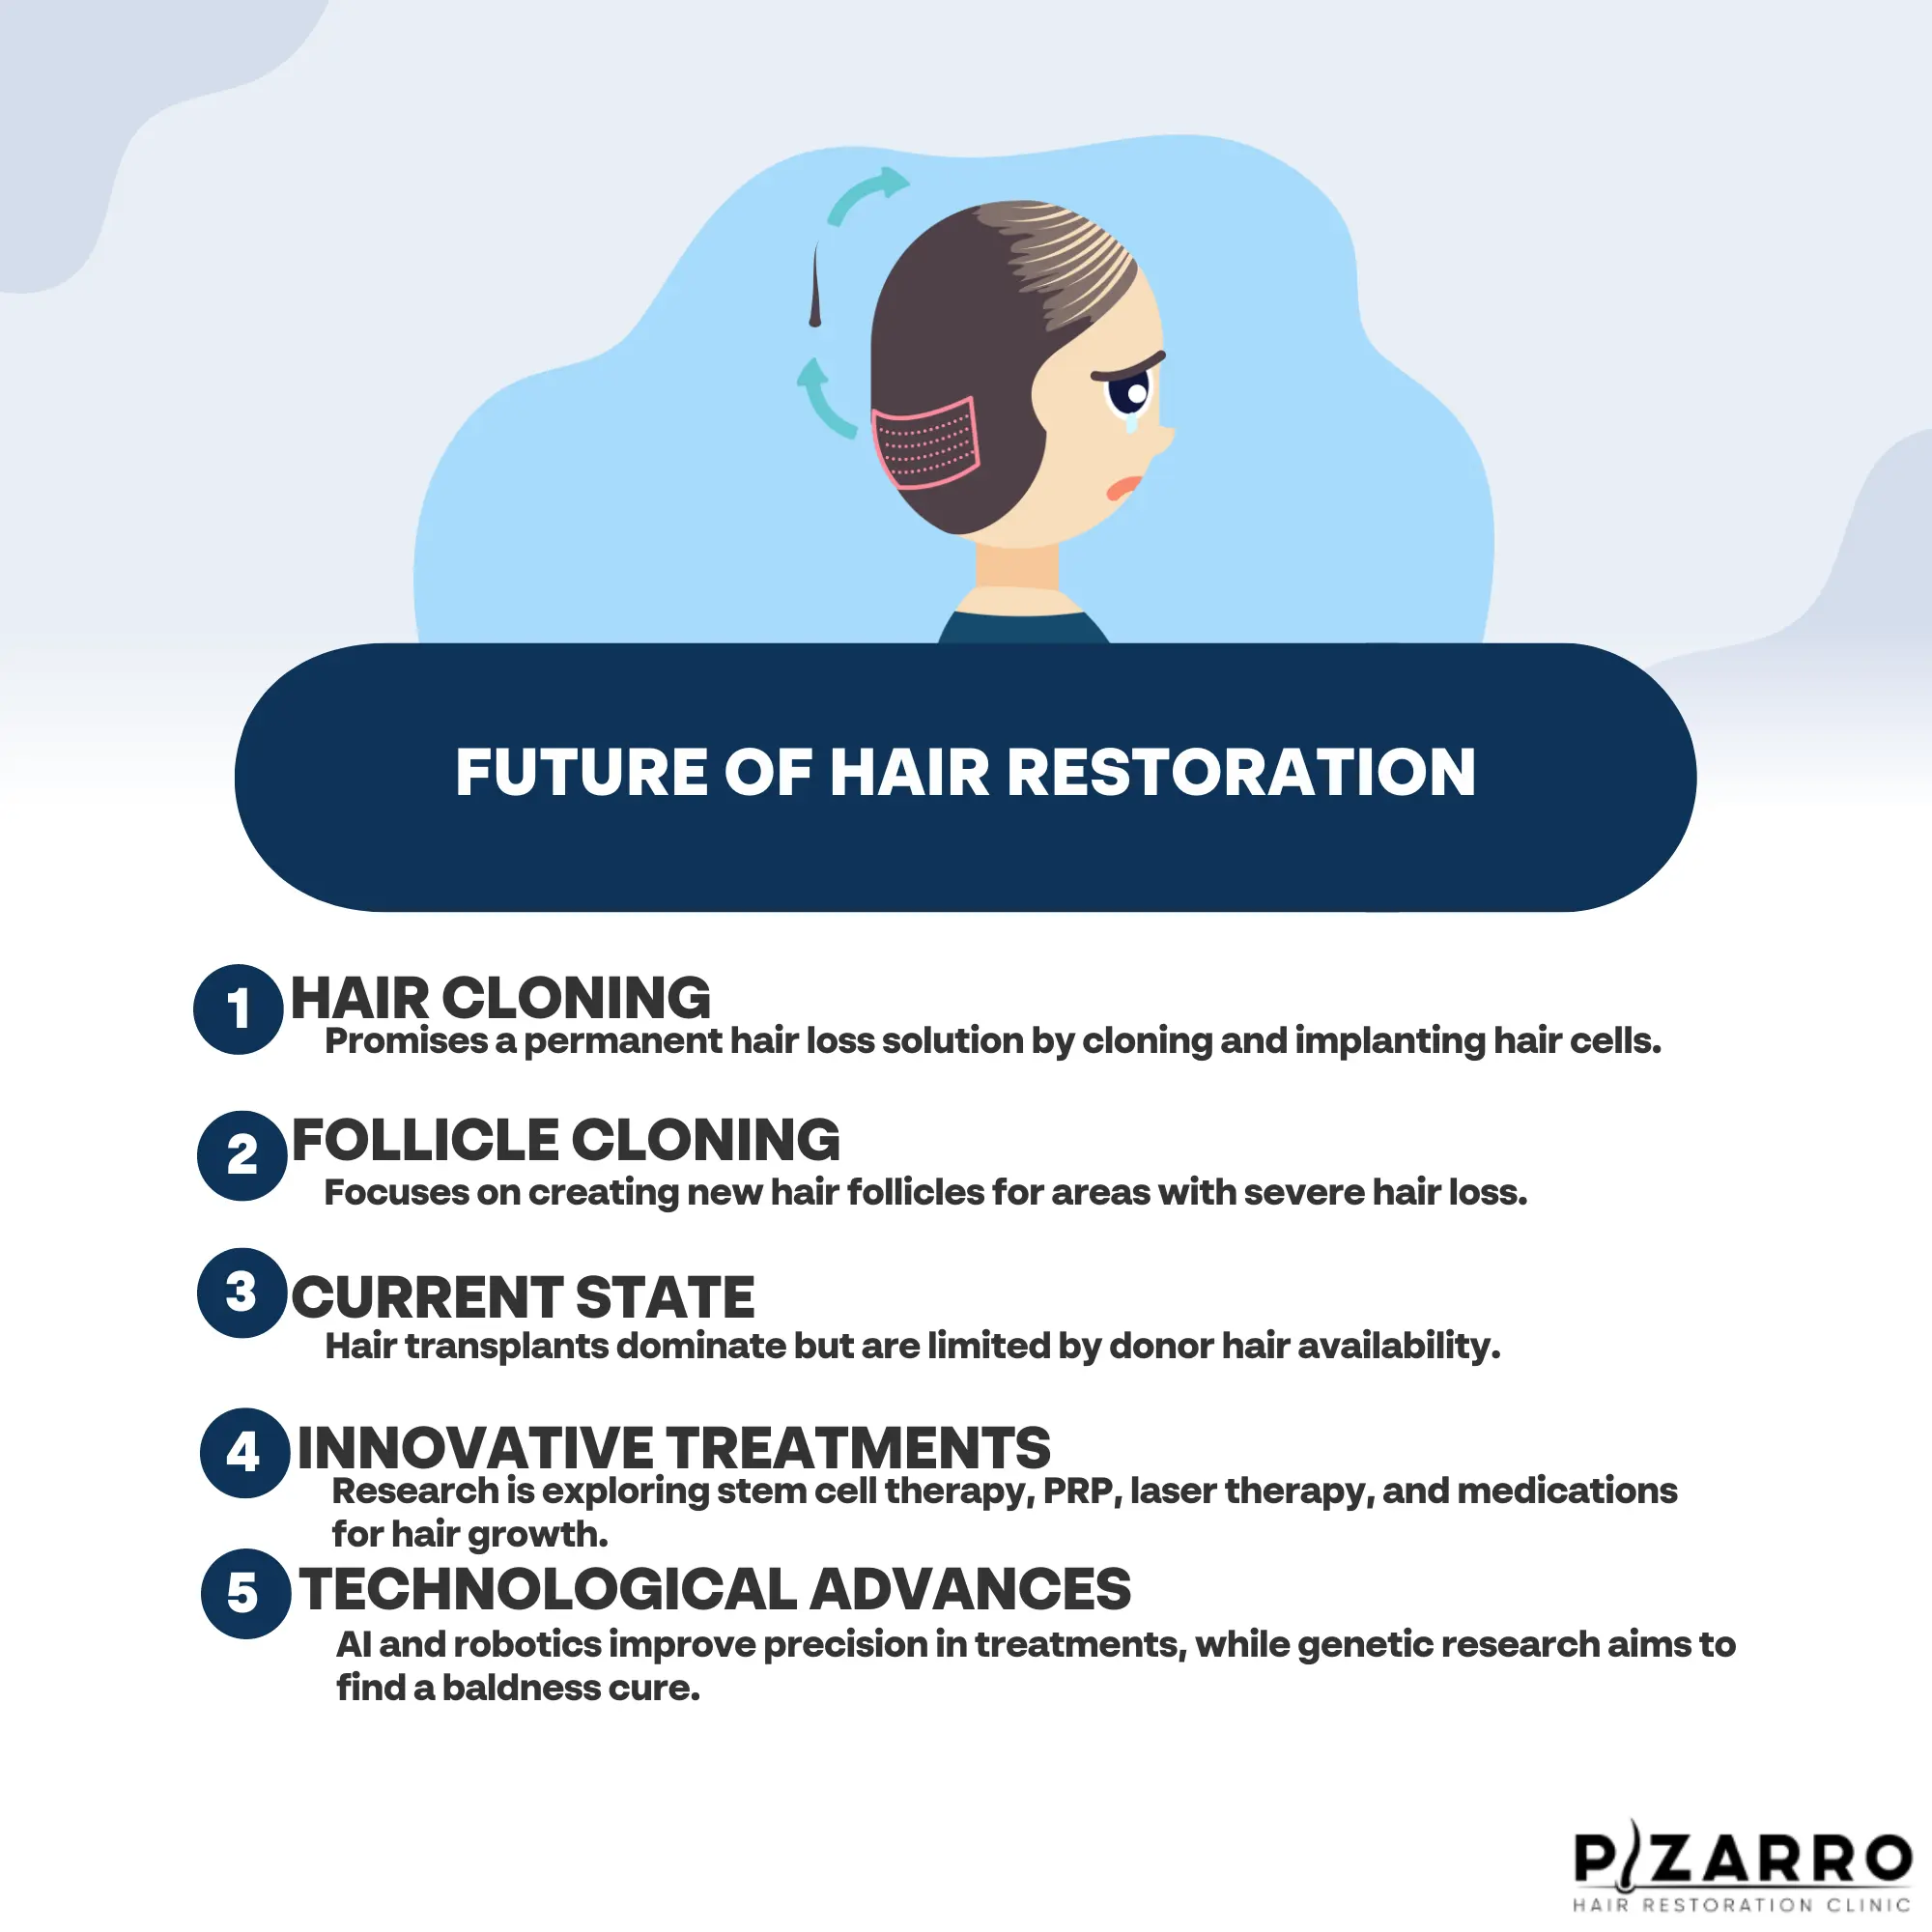 Hair Today, Gone Tomorrow? Exploring the Future of Hair Restoration